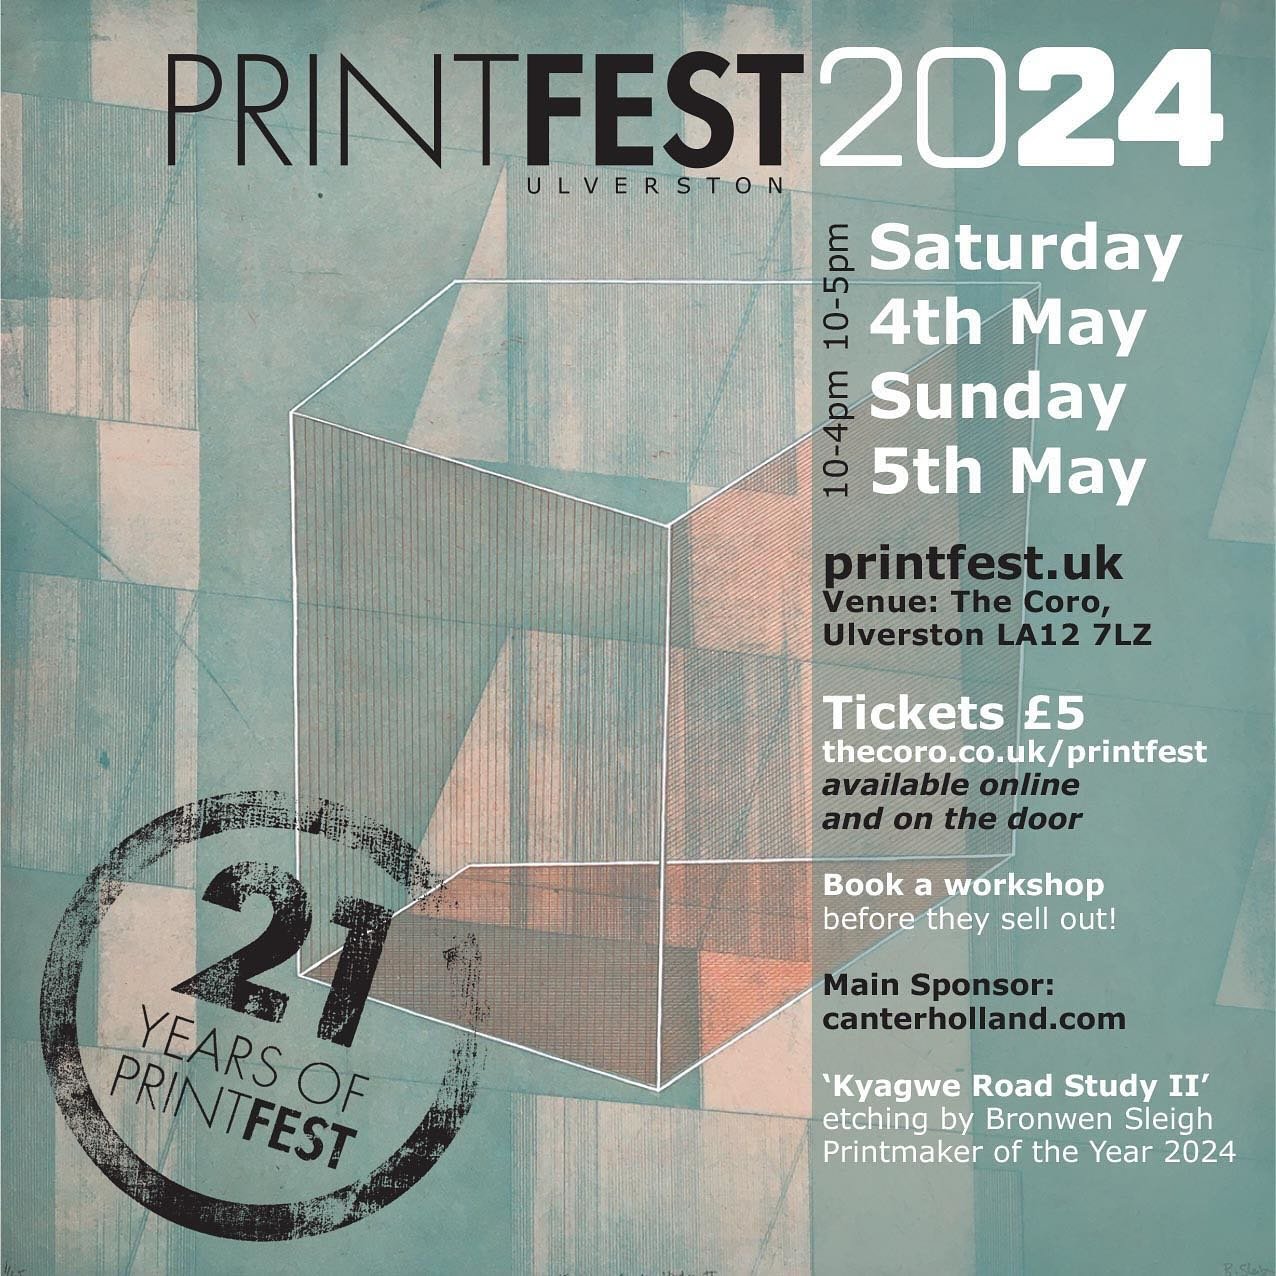 Printfest 2024 is next week! 
Saturday, 4th May, 10~5pm
Sunday, 5th May, 10~4pm
in the beautiful Lakes town of Ulverston 

Such a lovely event for us printmakers where we can all get together and enjoy showing our new work and chatting about all thin